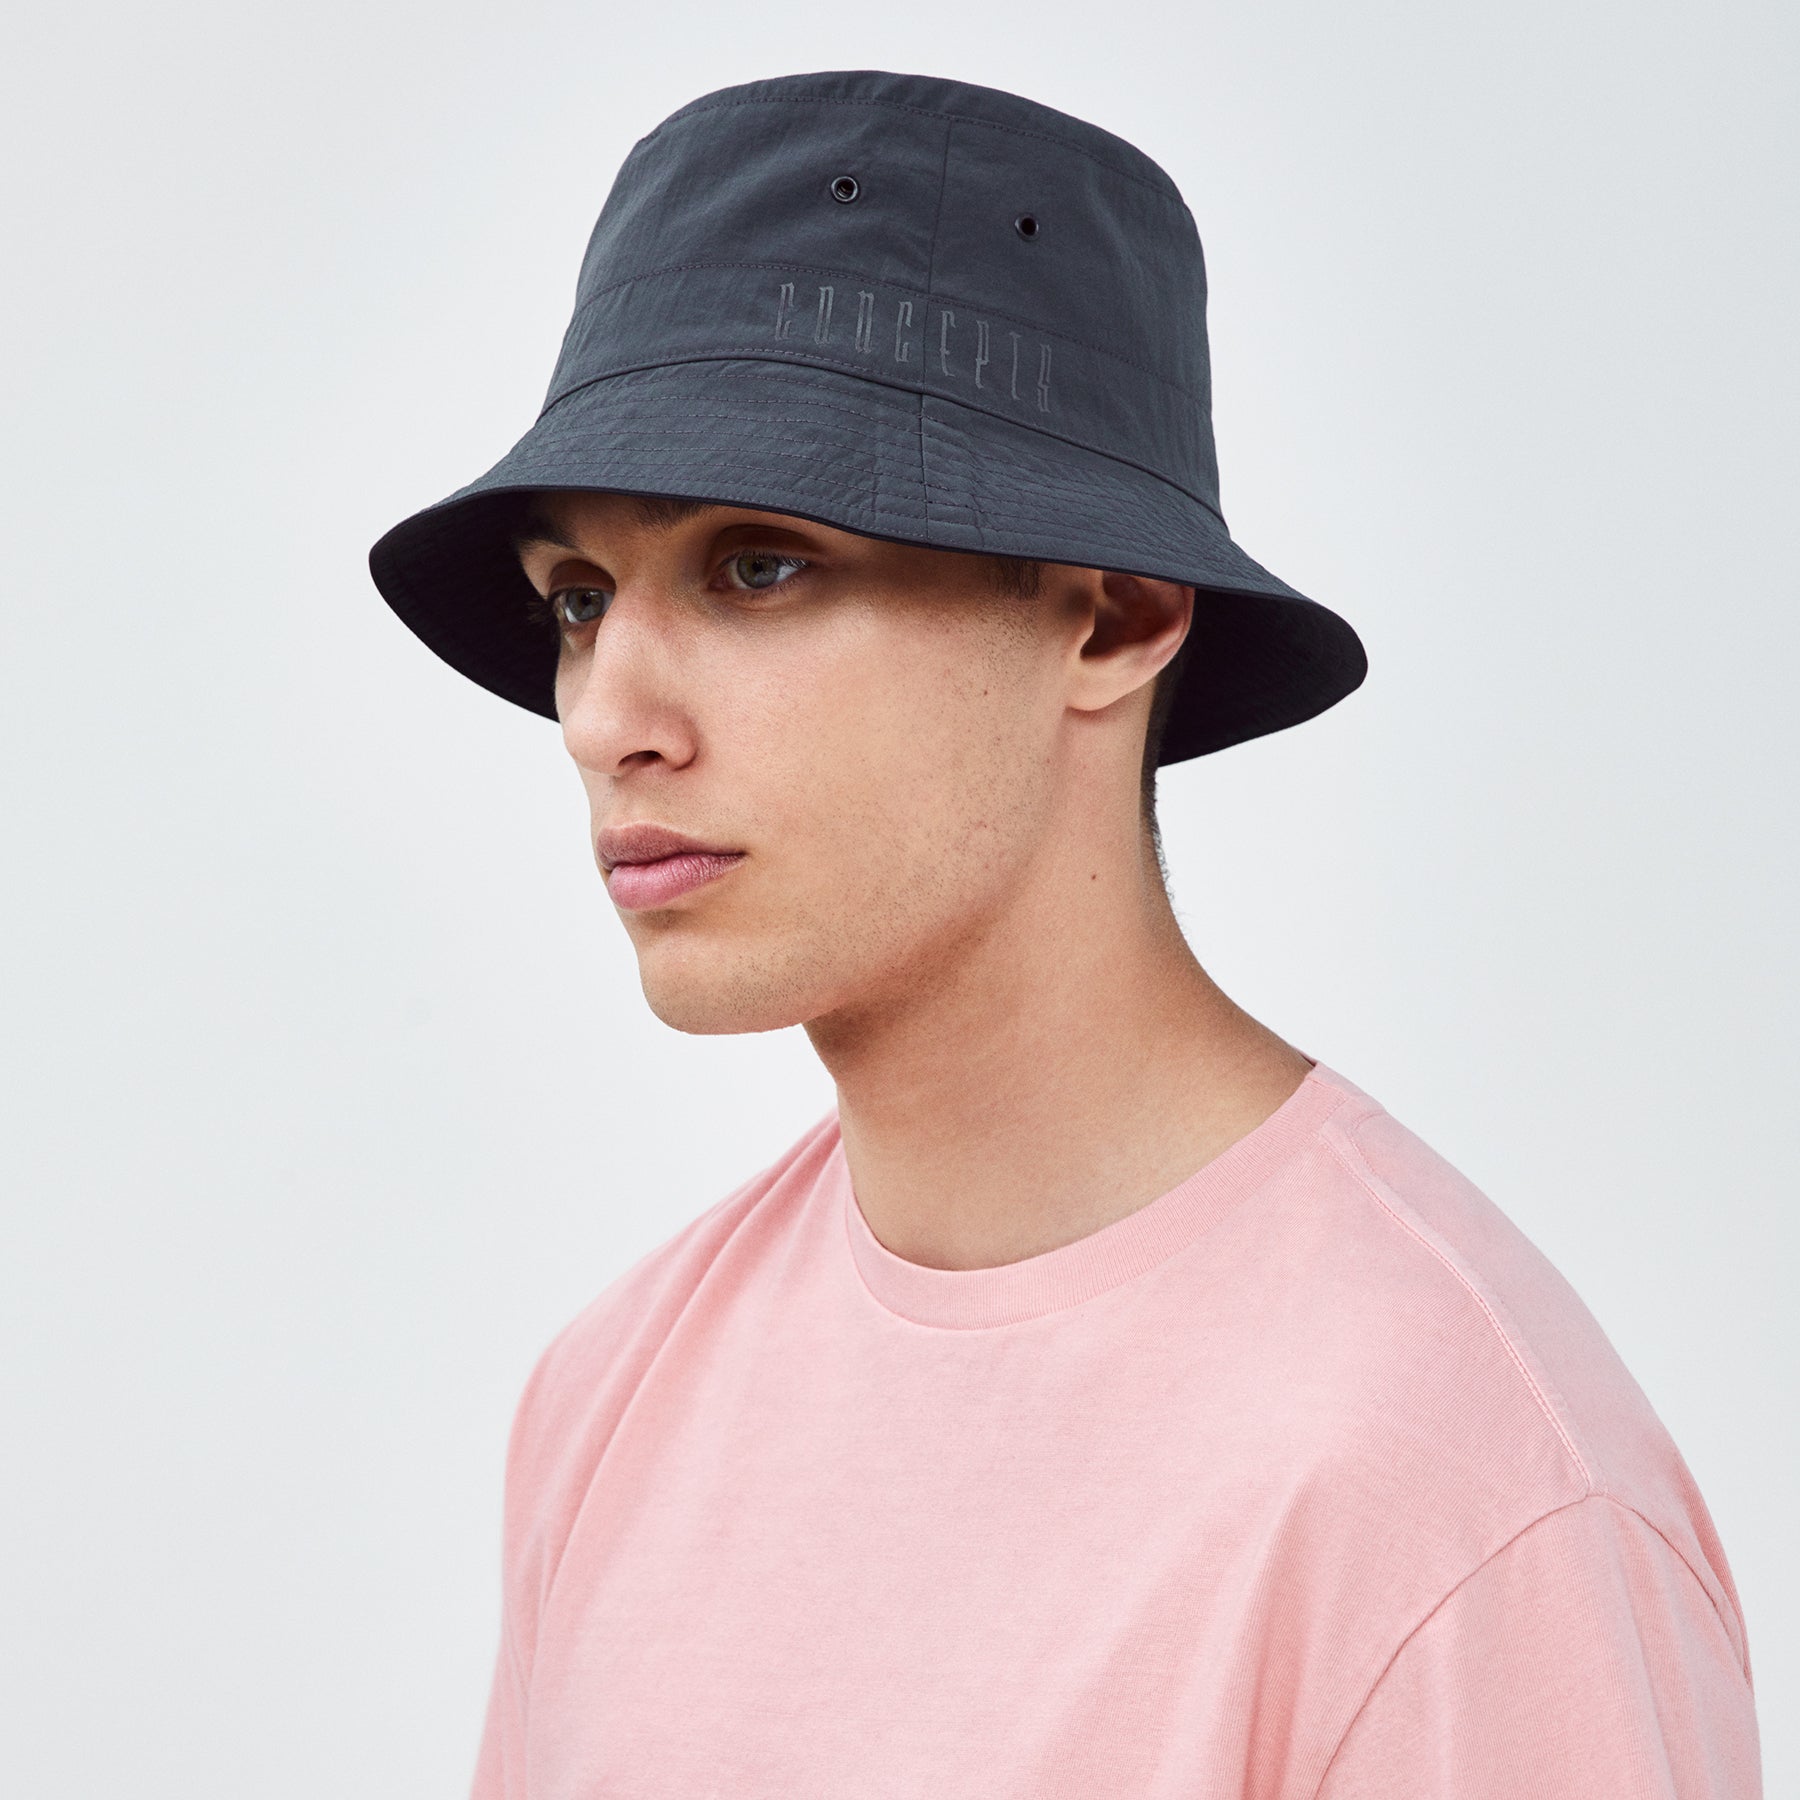 Concepts Gothic 3M Bucket Hat (Black/Pewter)